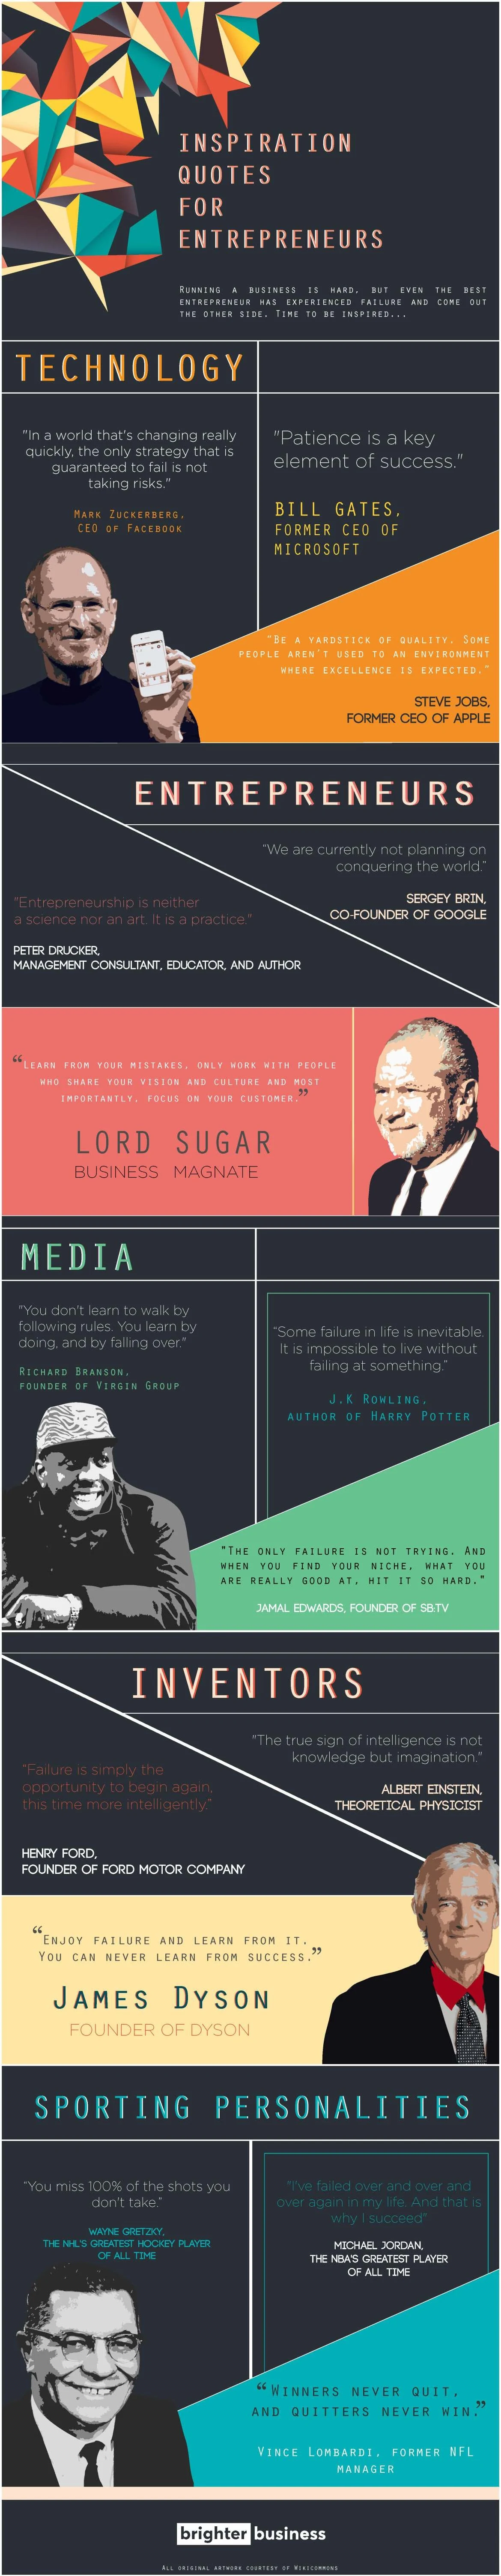 Inspiration Quotes For Entrepreneurs - #infographic